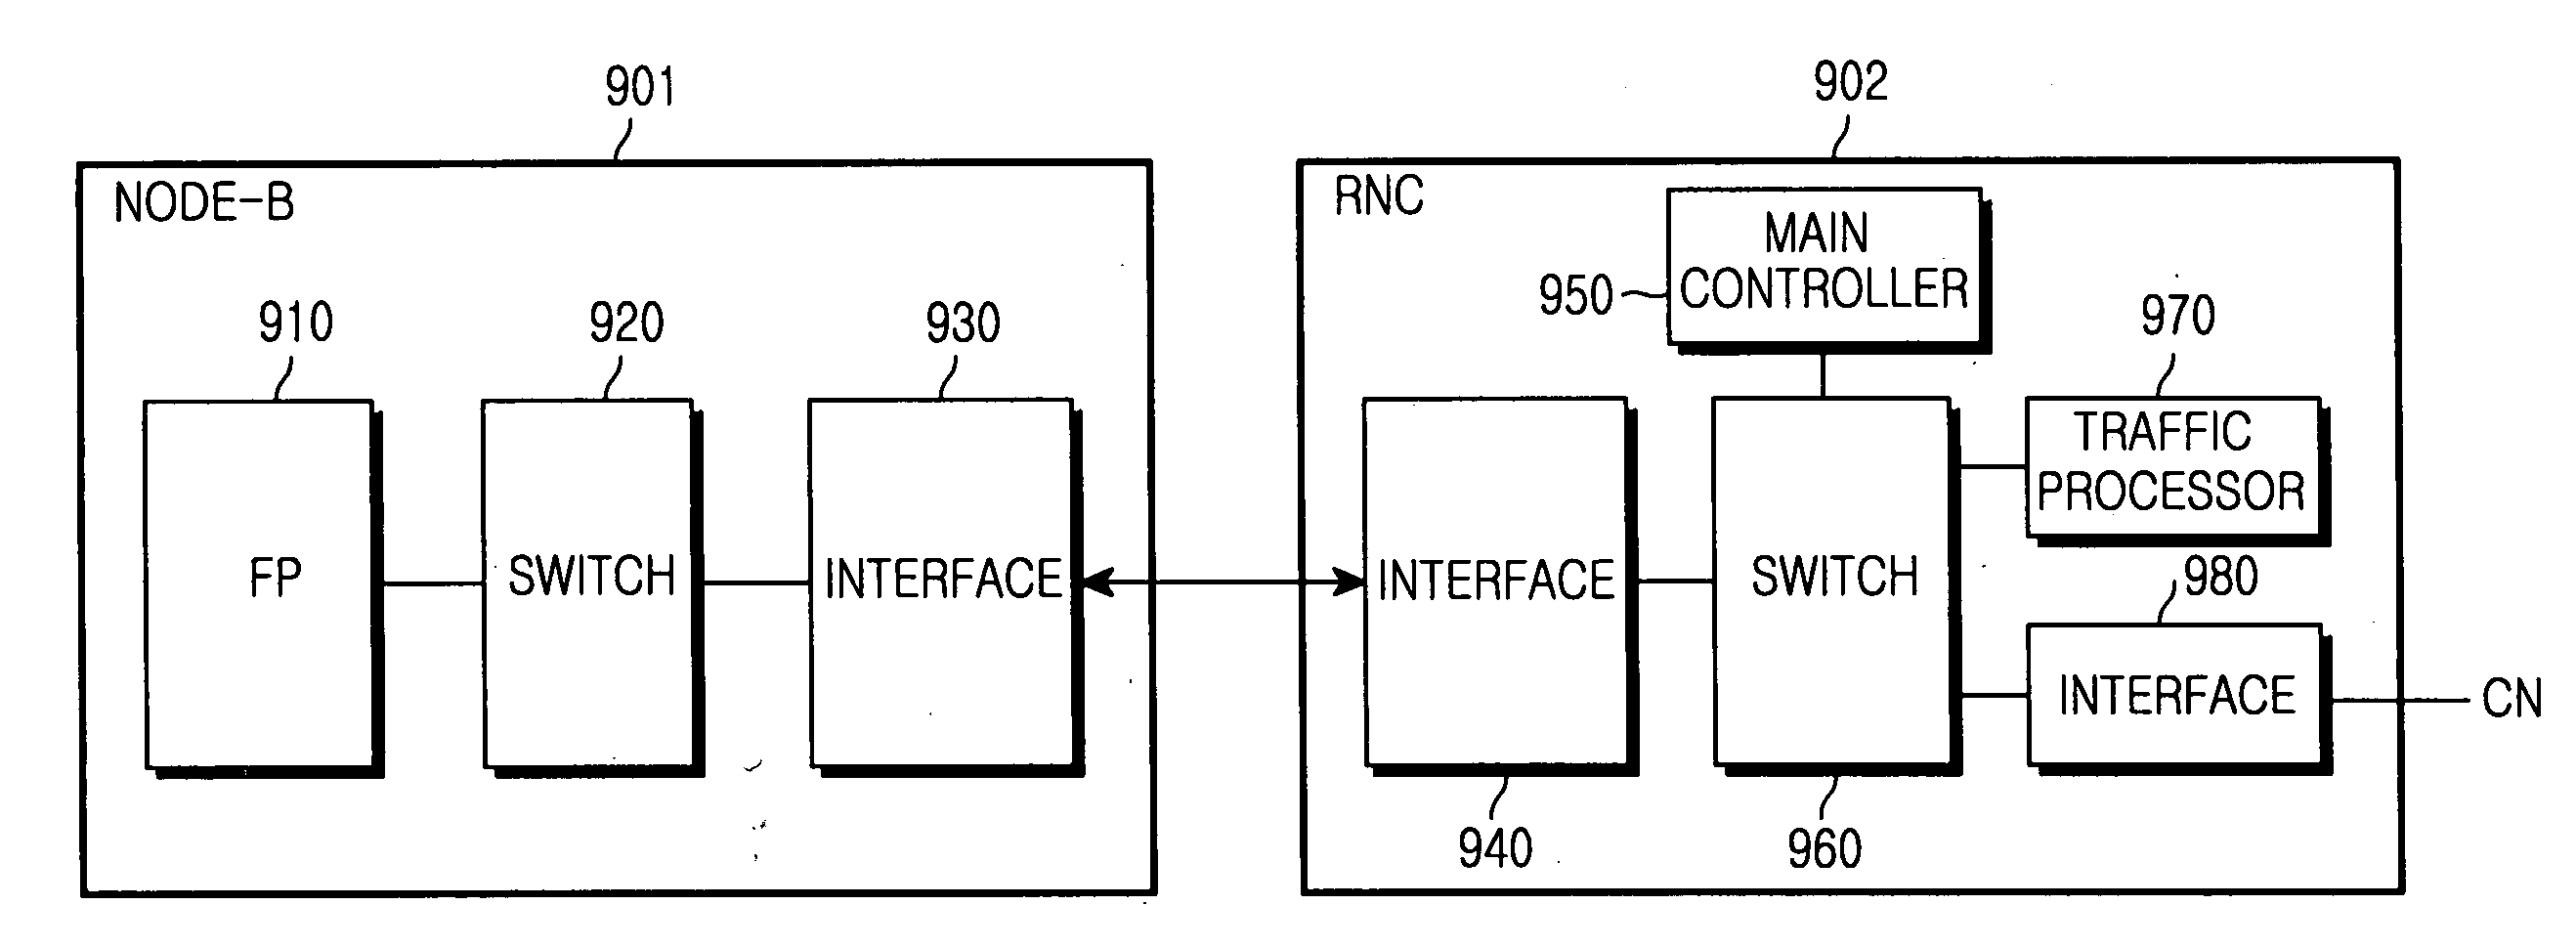 System and method for performing efficient flow control of packet data transmission between a radio network controller and a Node-B in a mobile communication system using a high-speed downlink packet access technique